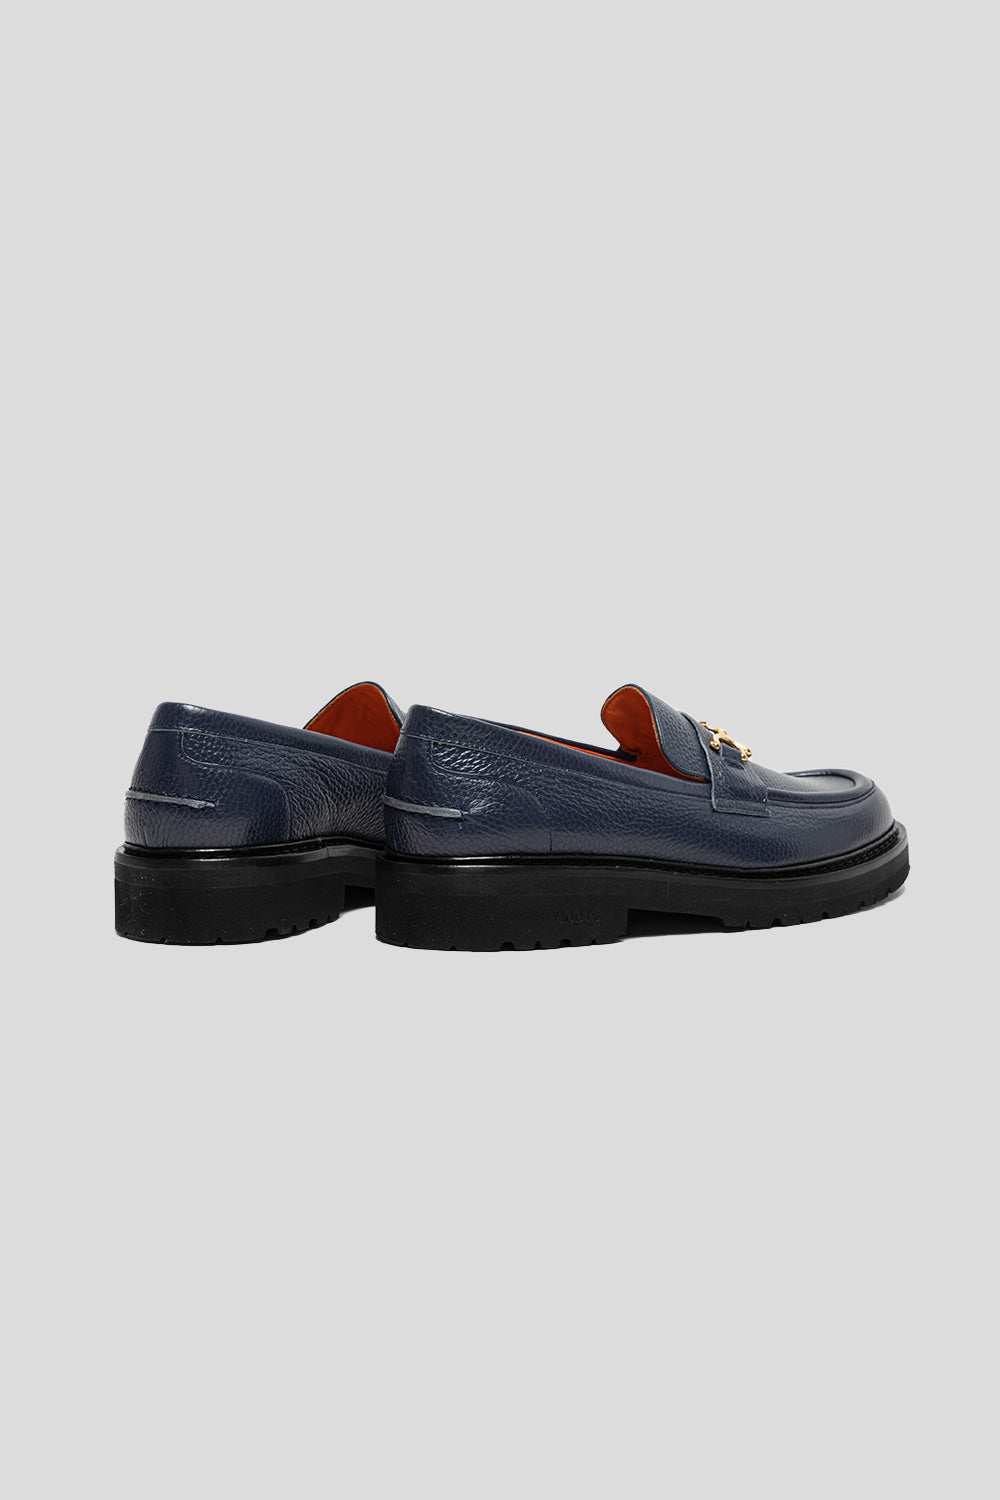 Vinny's x Soulland Palace Loafer in Midnight Blue